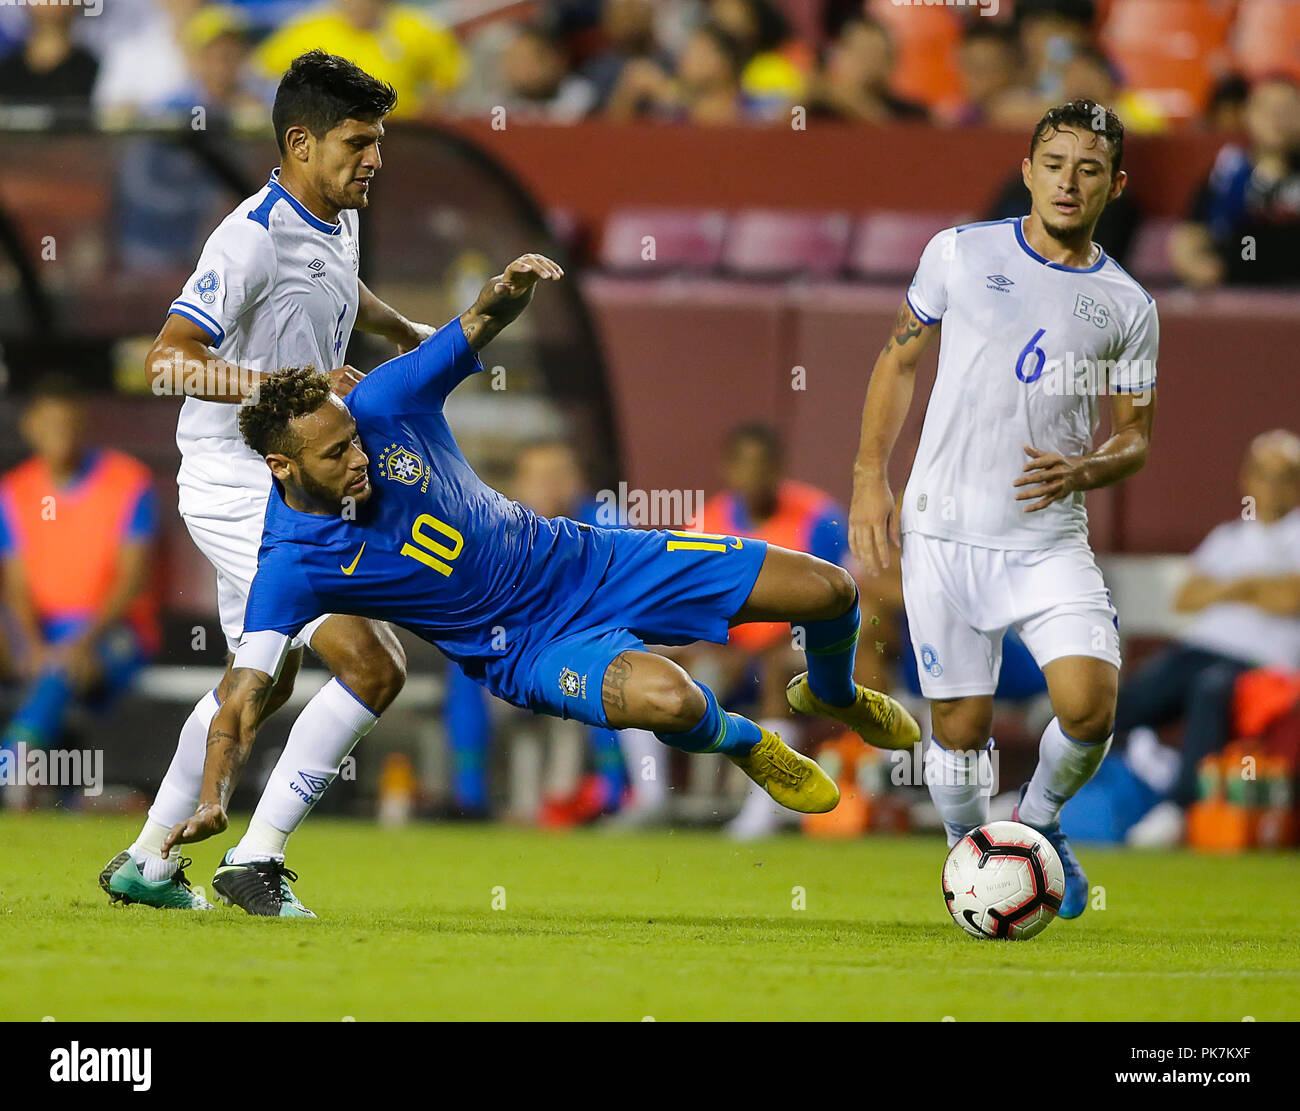 Washington DC, USA. 11th Sep, 2018. Brazil Forward #10 Neymar Jr continues to play the ball as he goes down to the turf during an International friendly soccer match between Brazil and El Salvador at Fedex Field in Washington DC. Justin Cooper/CSM/Alamy Live News Stock Photo